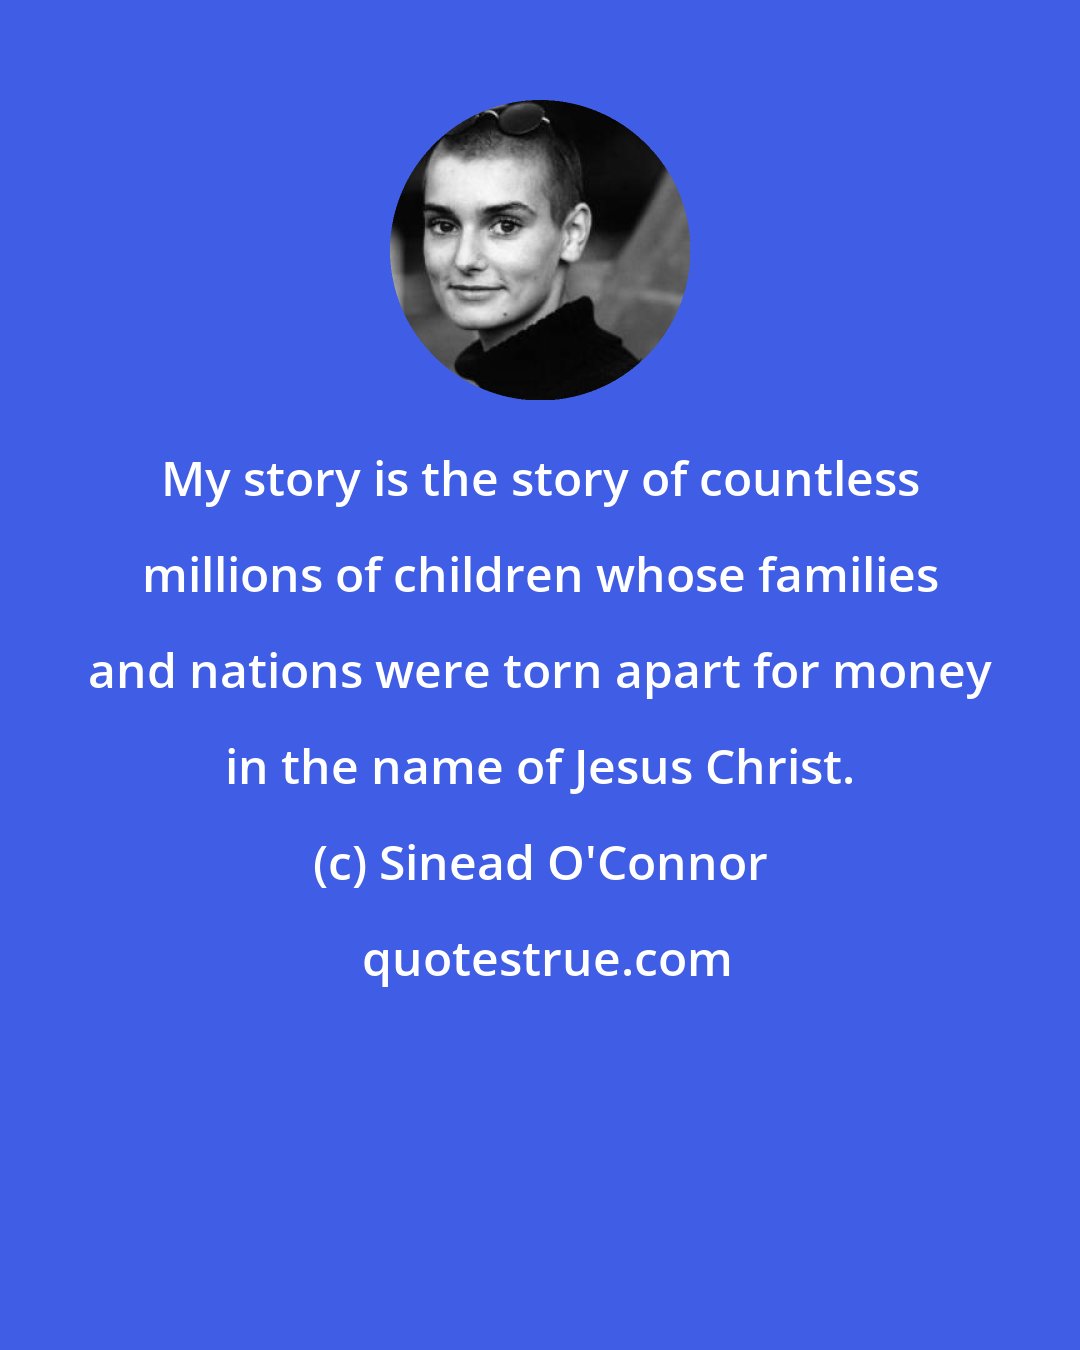 Sinead O'Connor: My story is the story of countless millions of children whose families and nations were torn apart for money in the name of Jesus Christ.